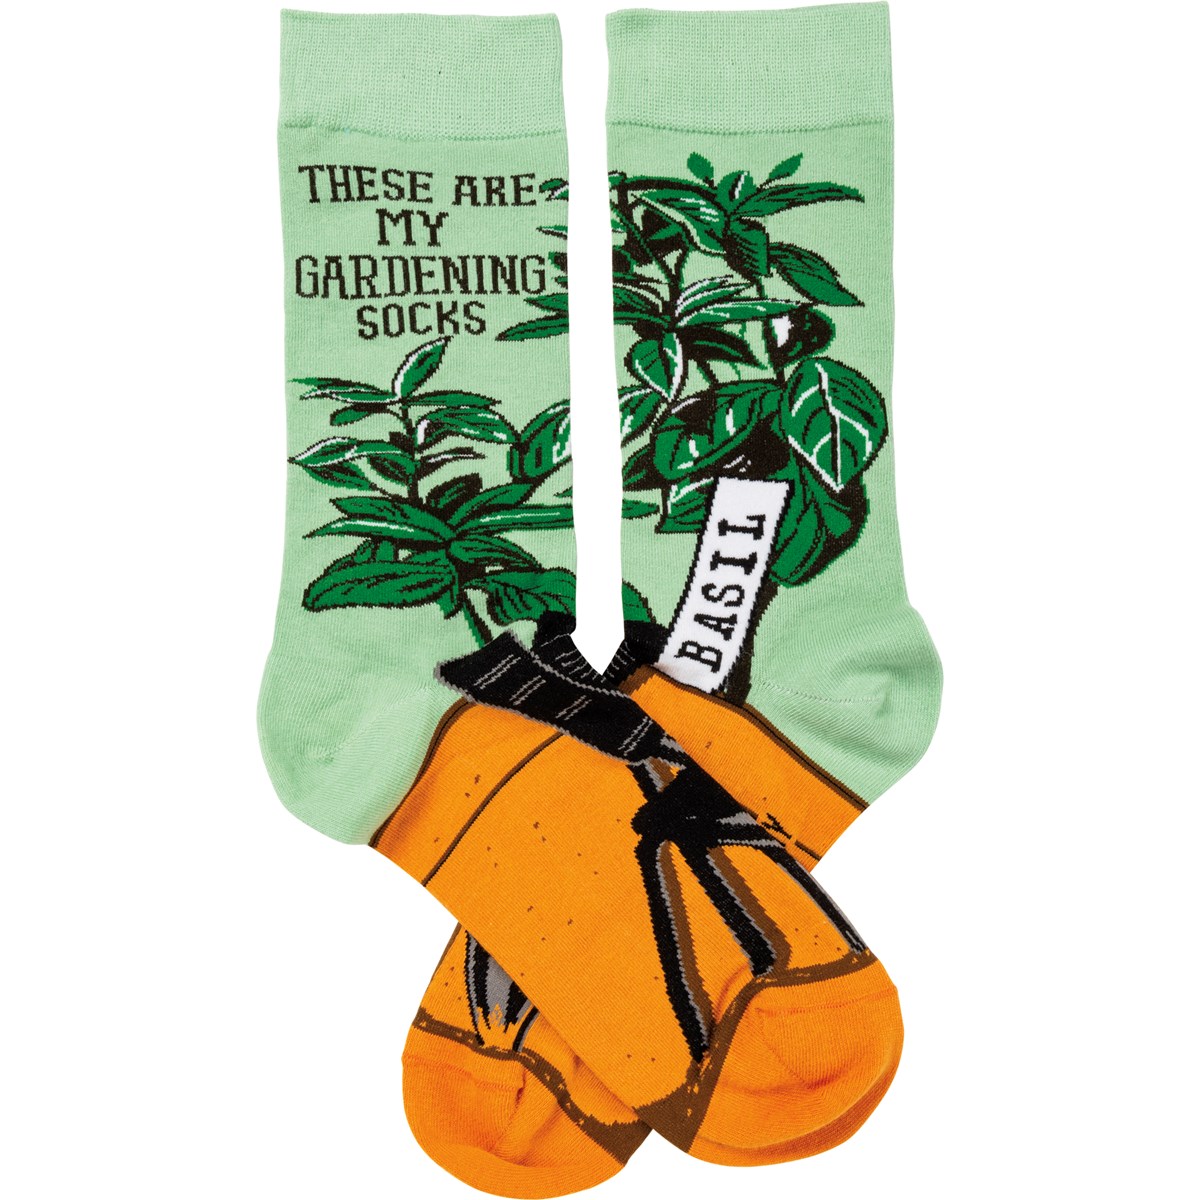 Socks - These Are My Gardening Socks - One Size Fits Most - Cotton, Nylon, Spandex